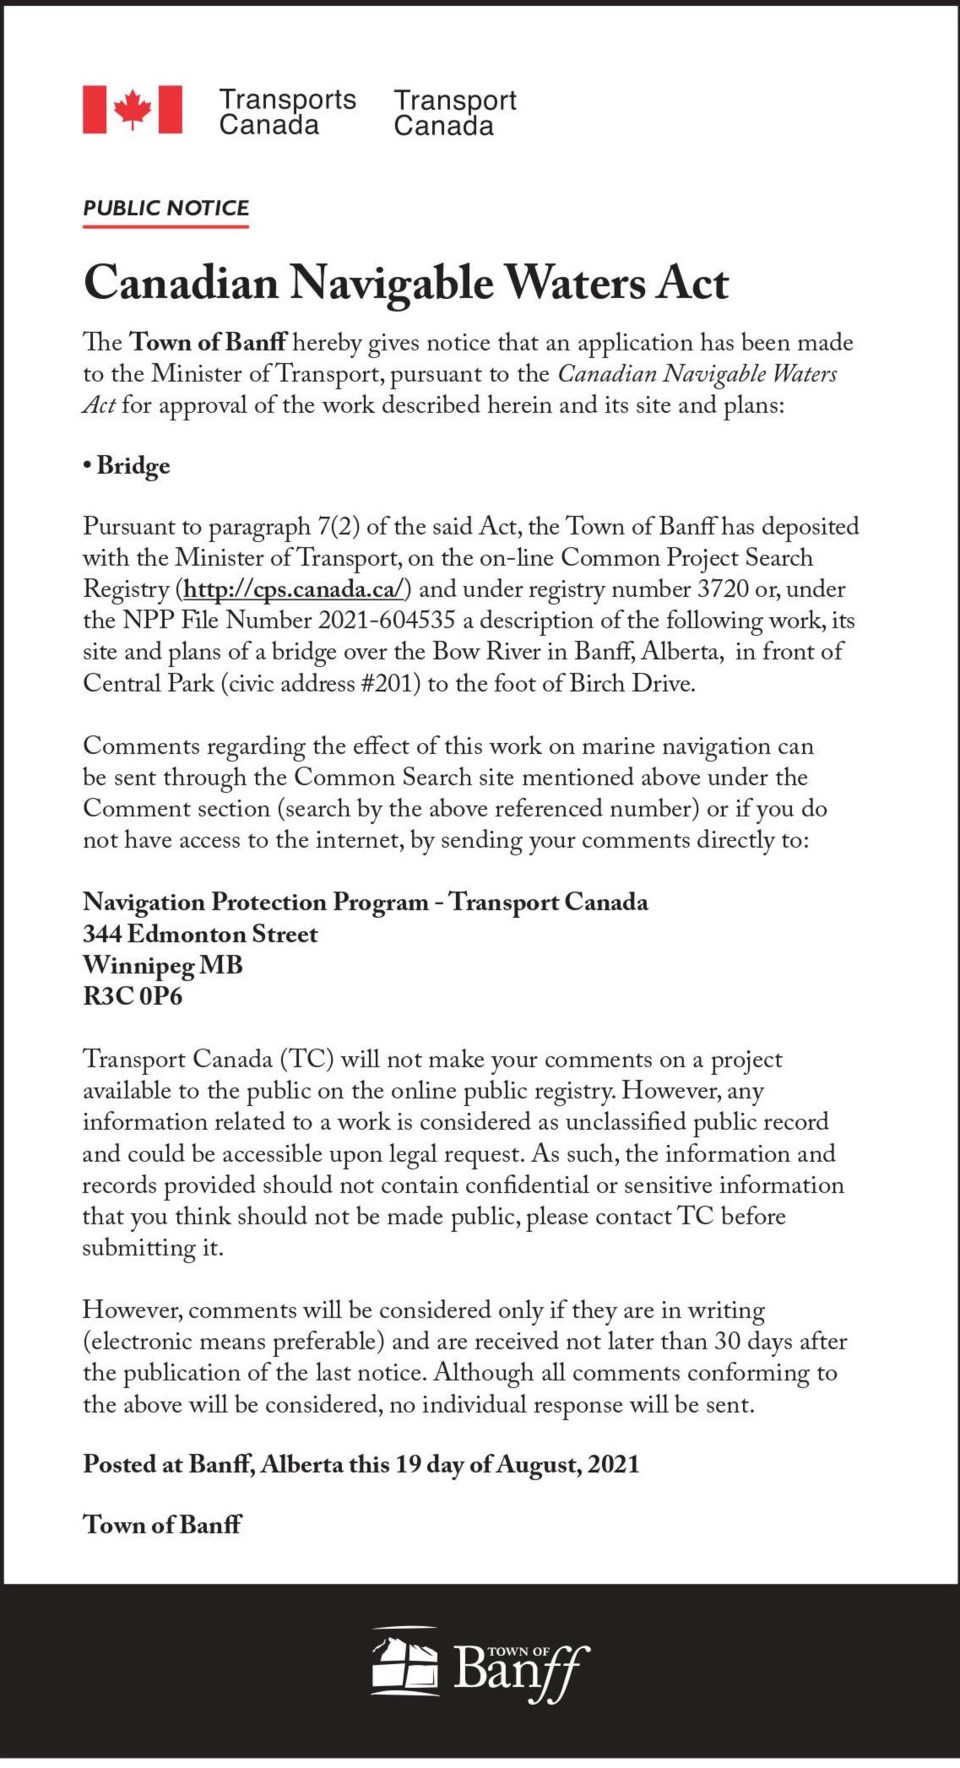 Public Notice - Transport Canada - Canadian Navigable Waters Act - August 19, 2021